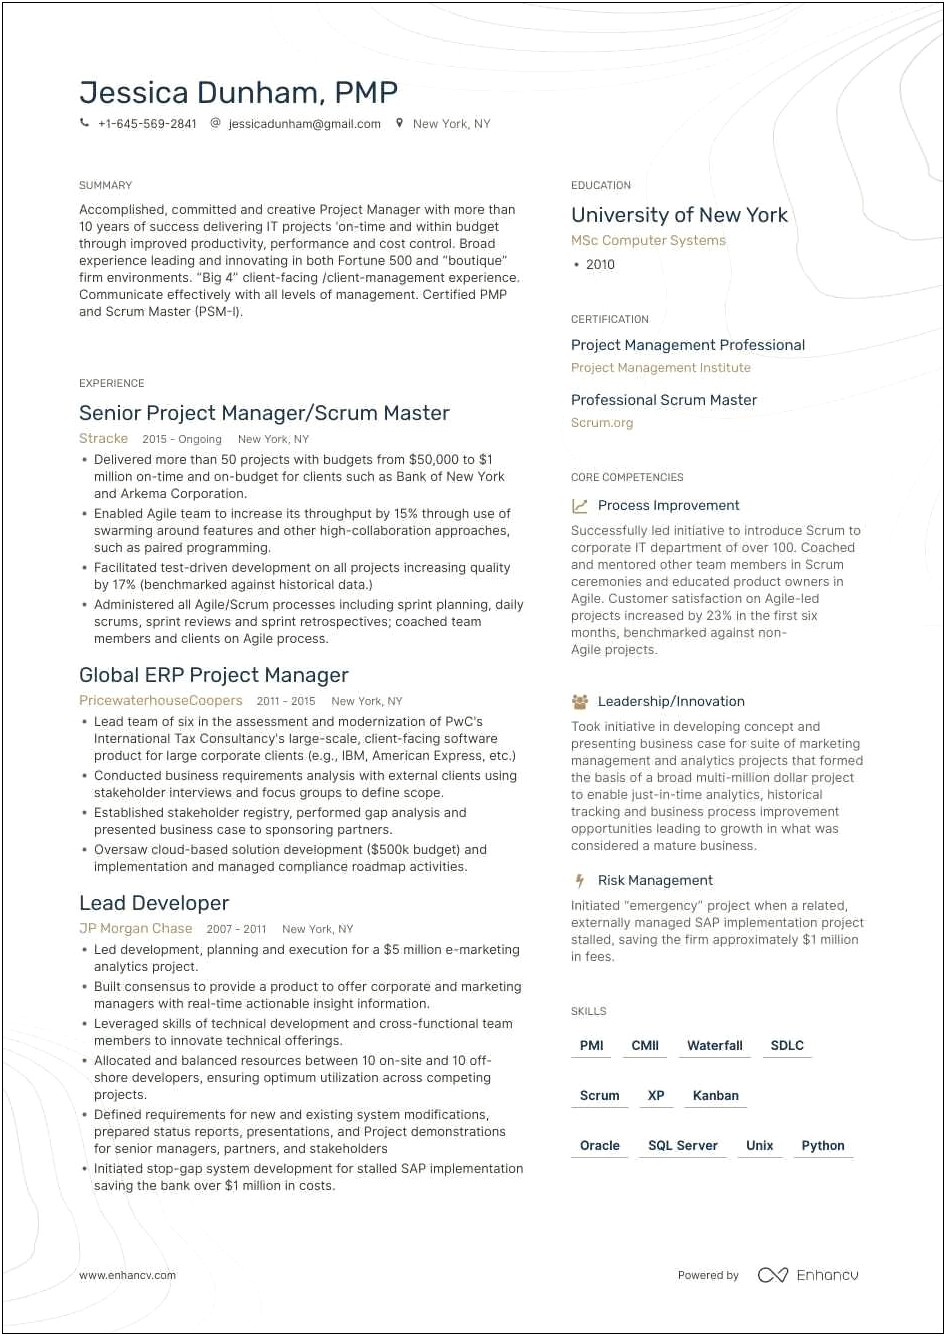 Product Cost Controller Resume Samples